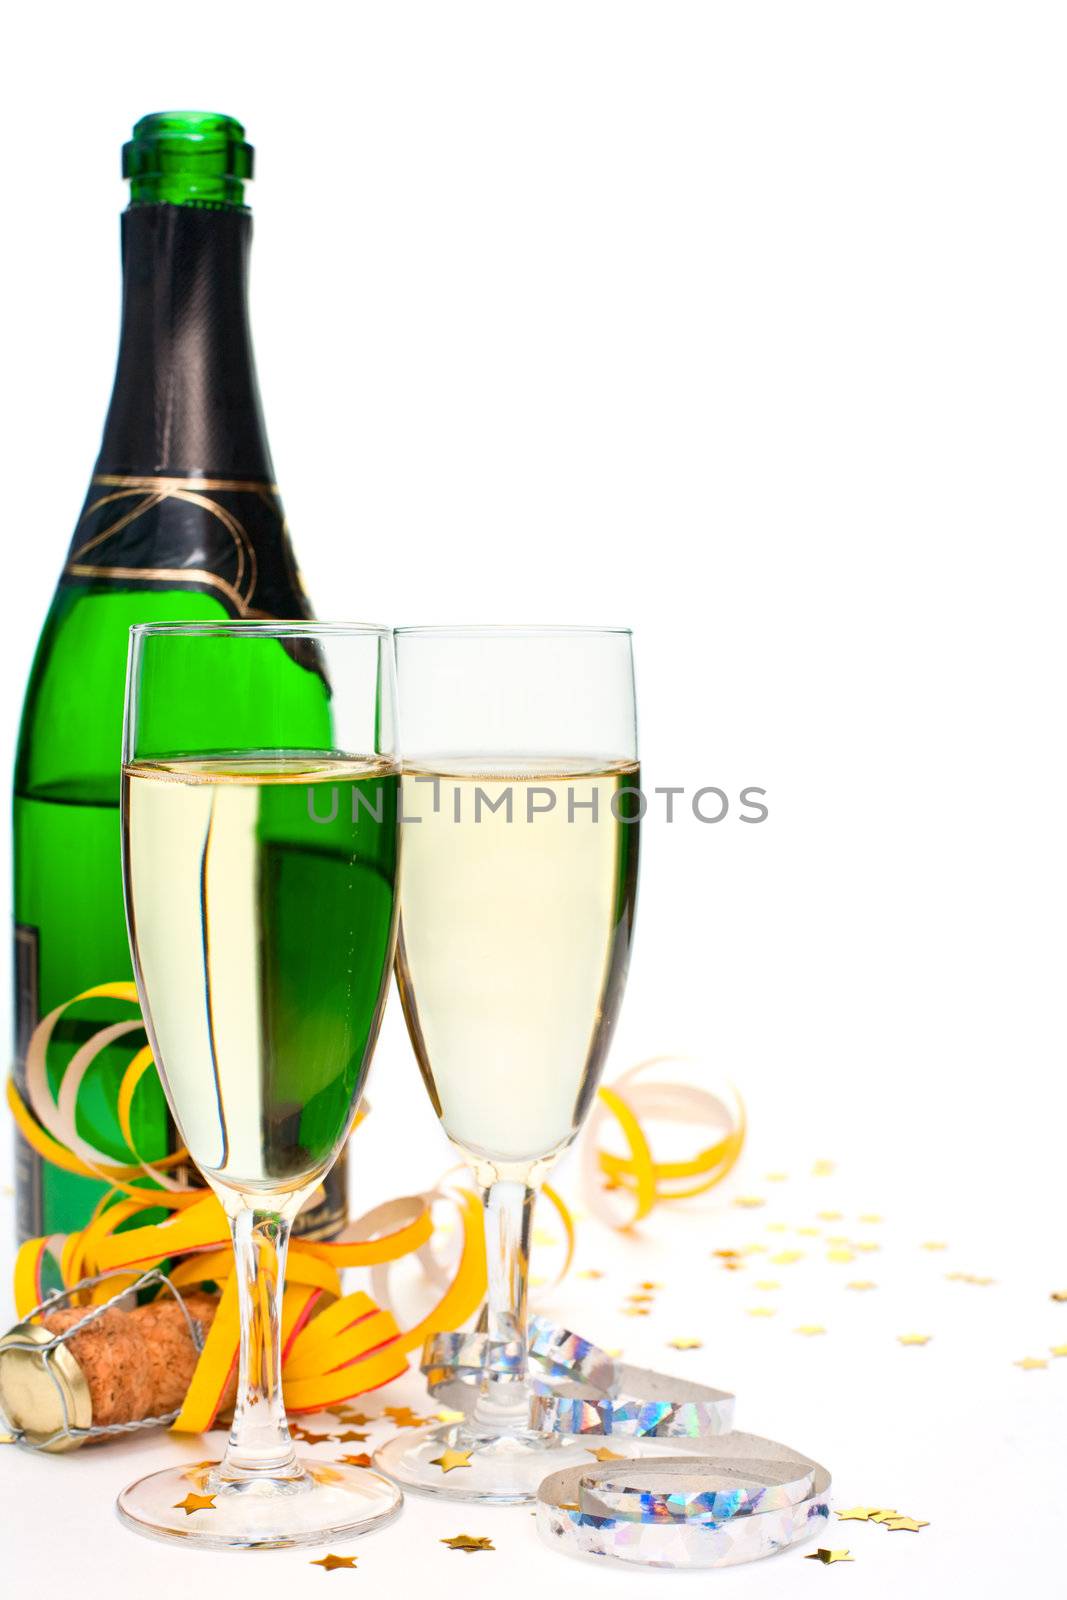 Two glasses of champagne with ribbons and confetti on white background